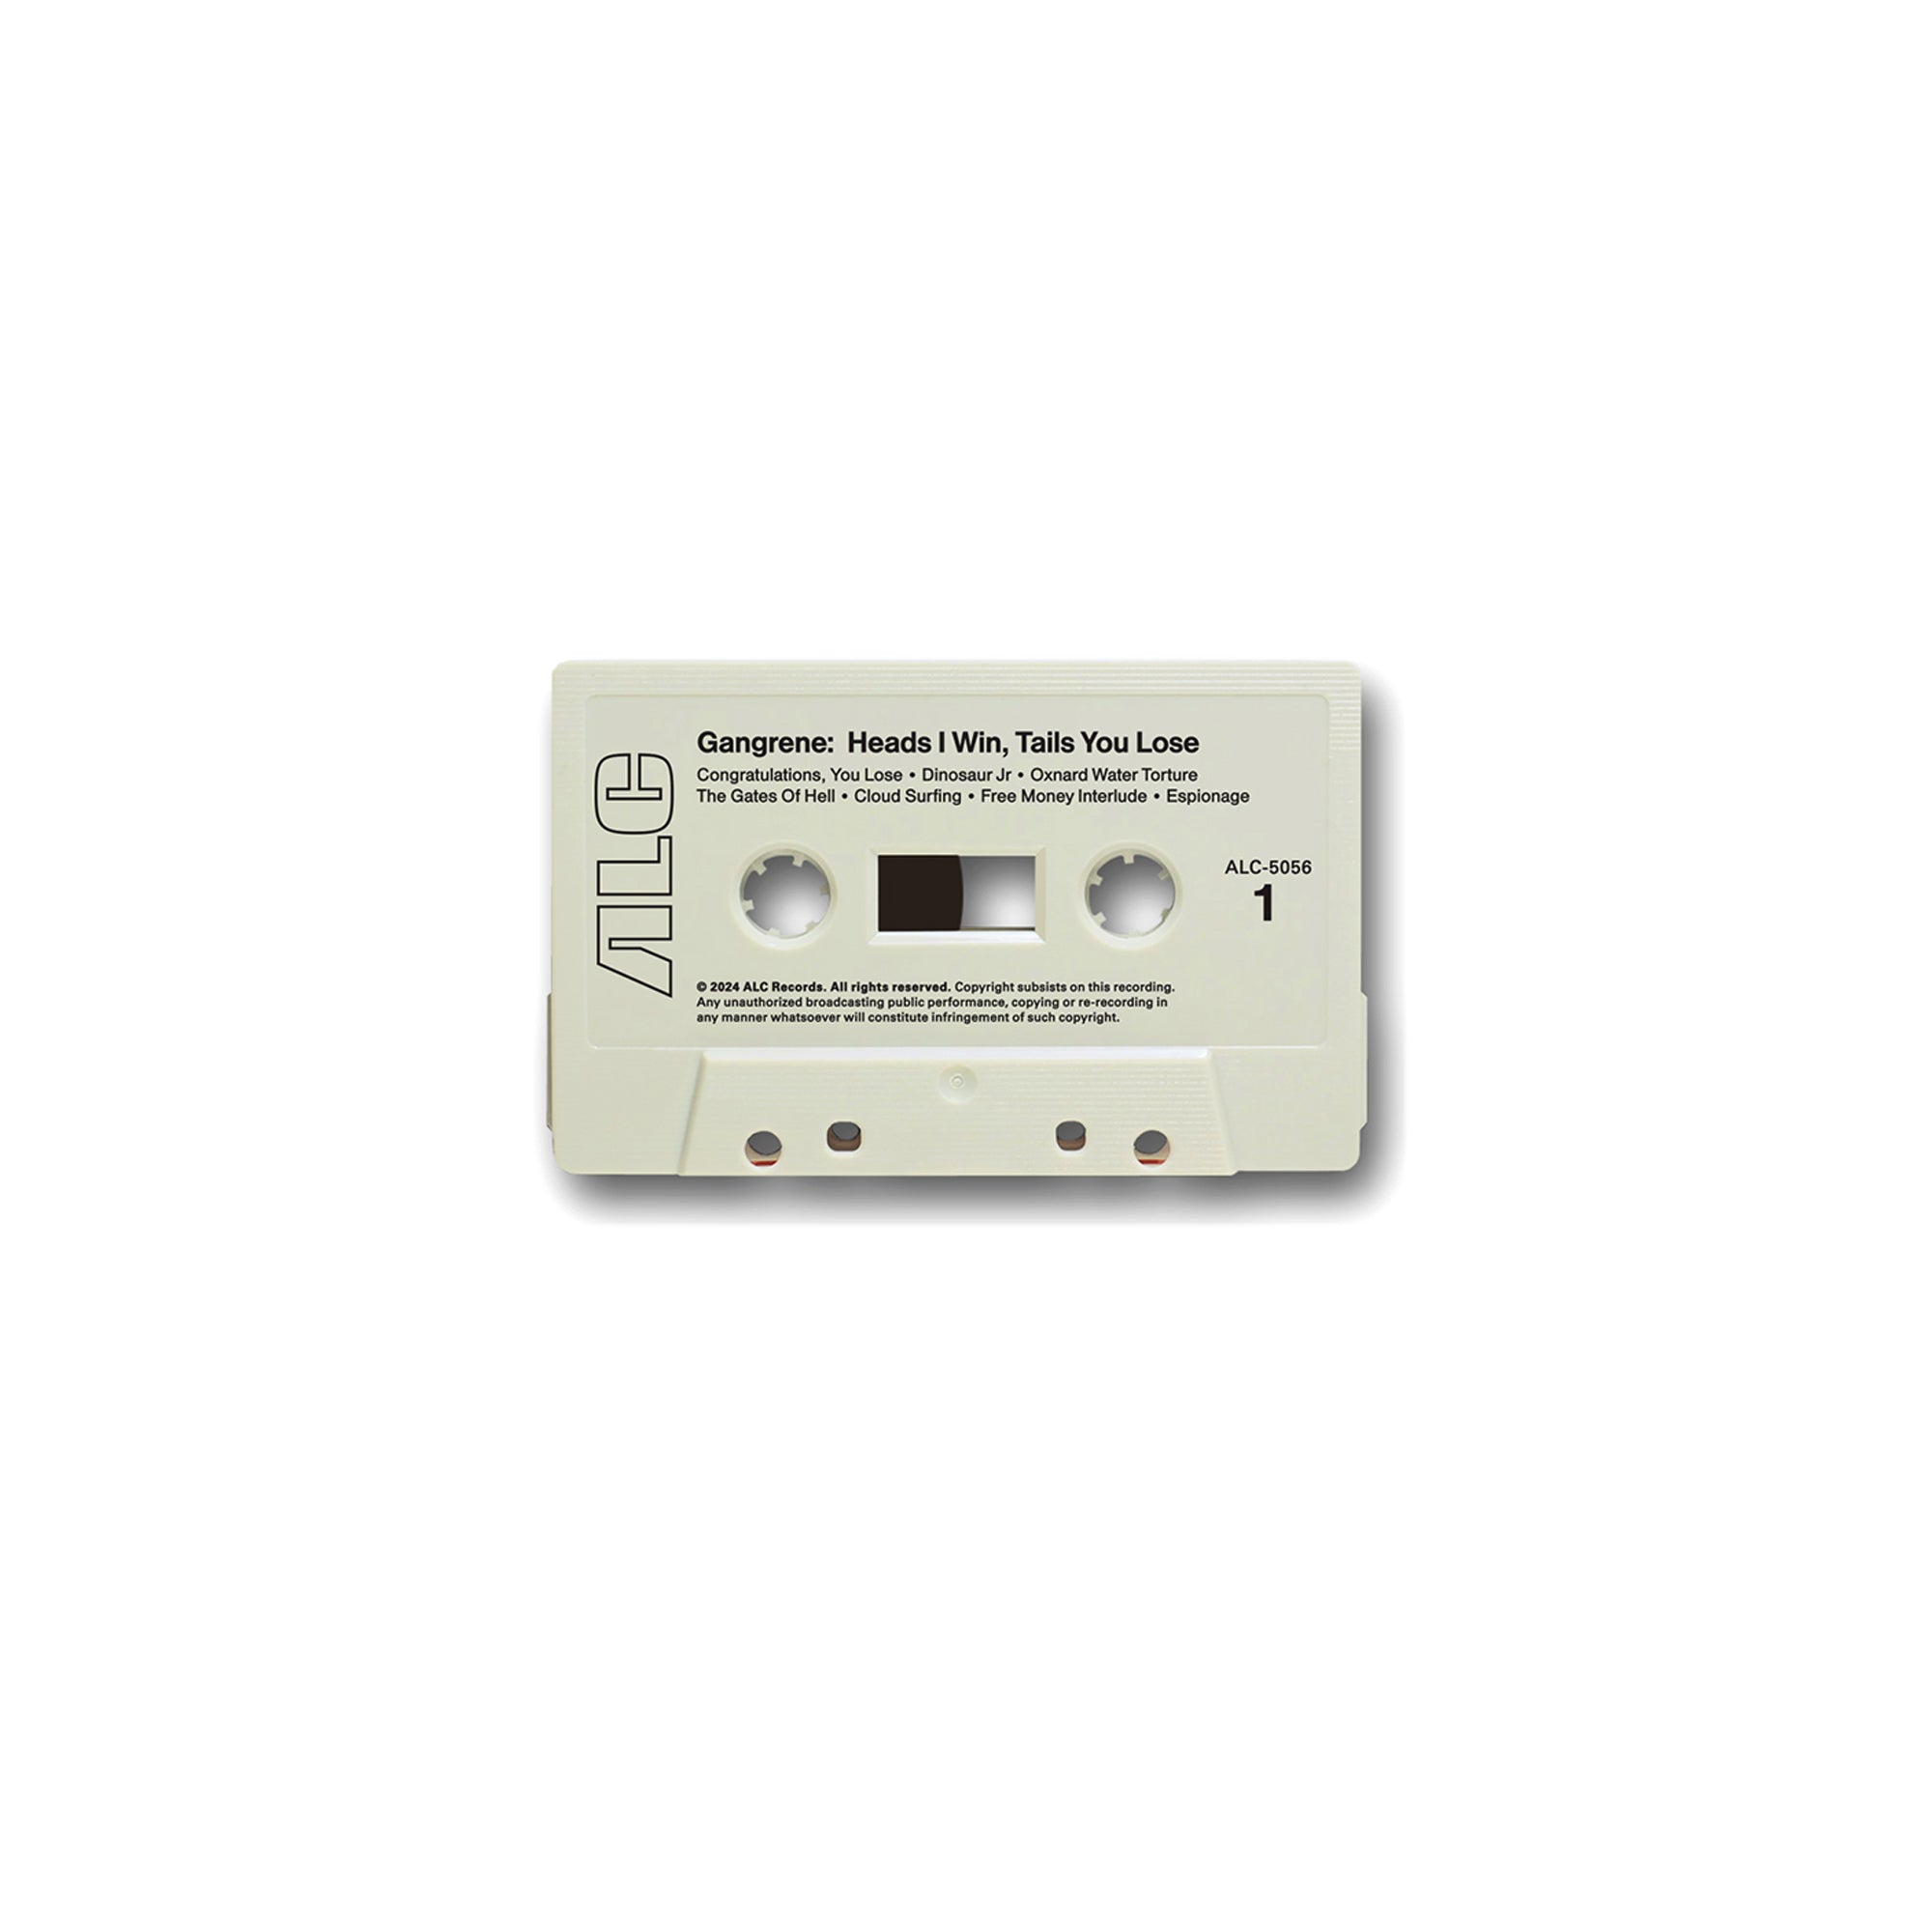 Heads I Win, Tails You Lose (Cassette)